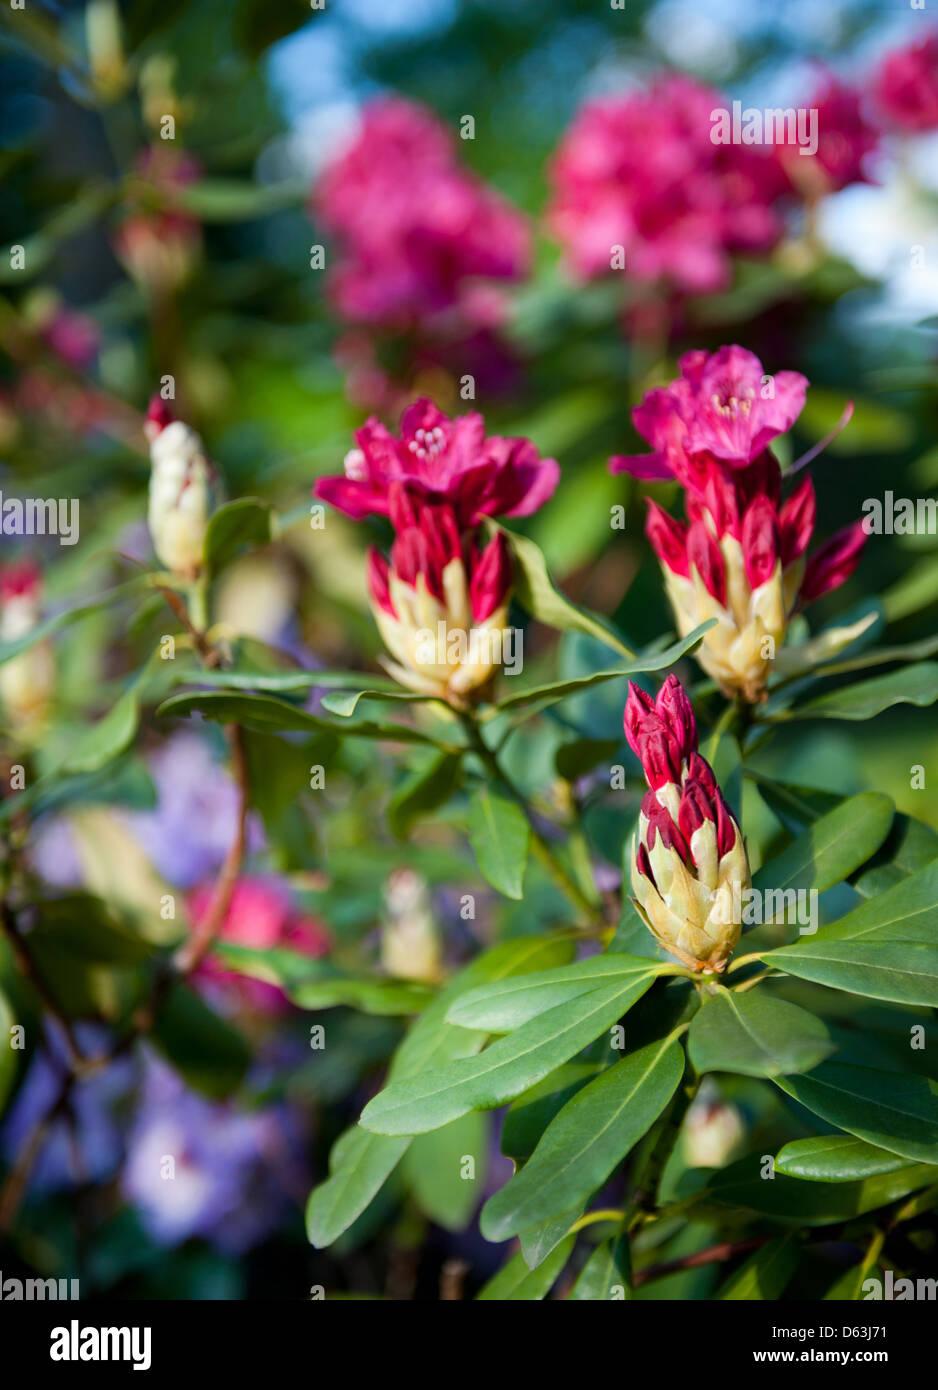 Rhododendron or Azalea buds bright pink Stock Photo